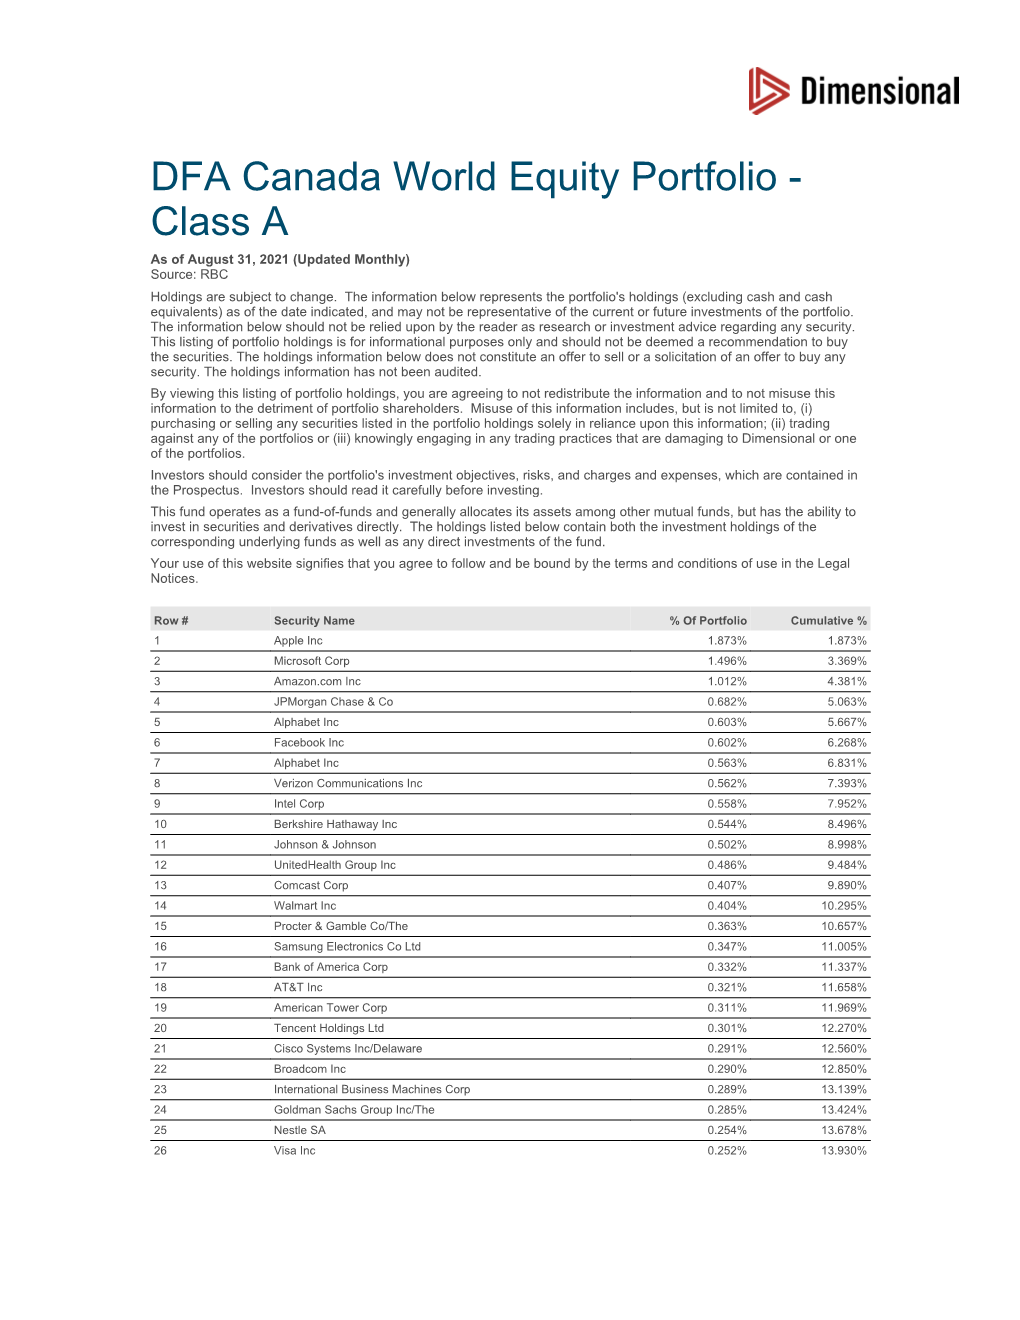 DFA Canada World Equity Portfolio - Class a As of August 31, 2021 (Updated Monthly) Source: RBC Holdings Are Subject to Change